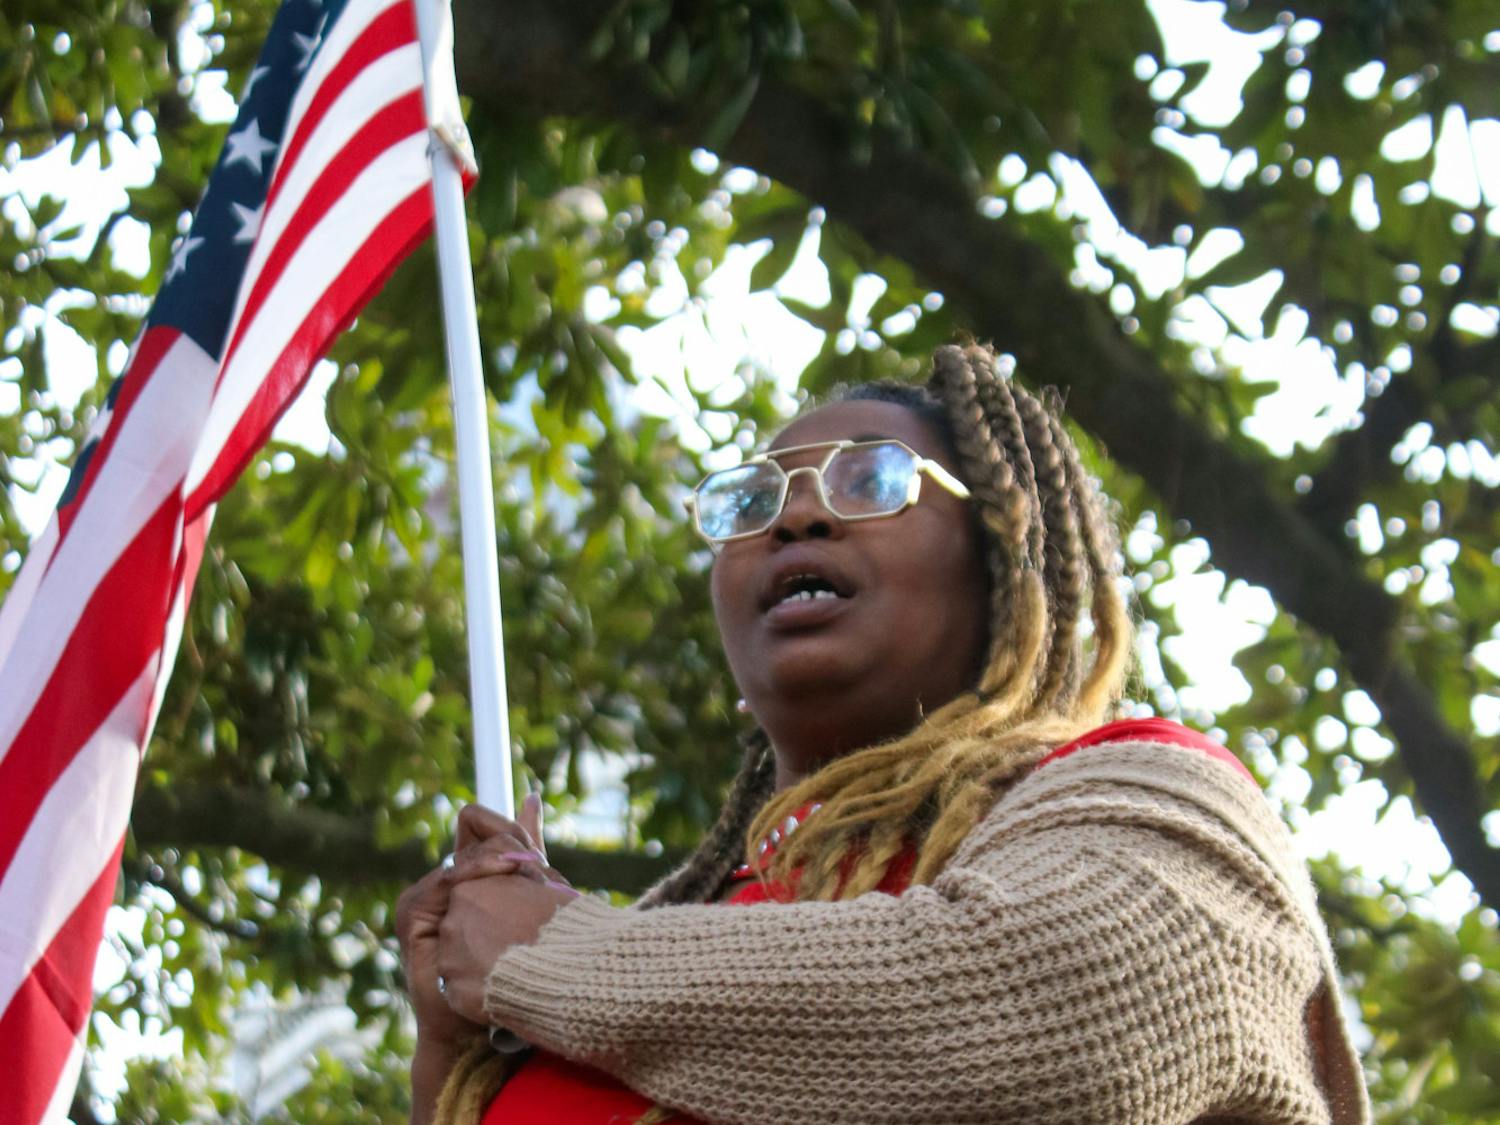 Virgina Mills holds an American flag while standing outside of the Statehouse on Jan. 28, 2023. Mills aligned herself with the Democratic party for about 30 years, before shifting ideologies. She said the Democratic Party weaponizes minority groups and overly generalizes them as struggling.&nbsp;